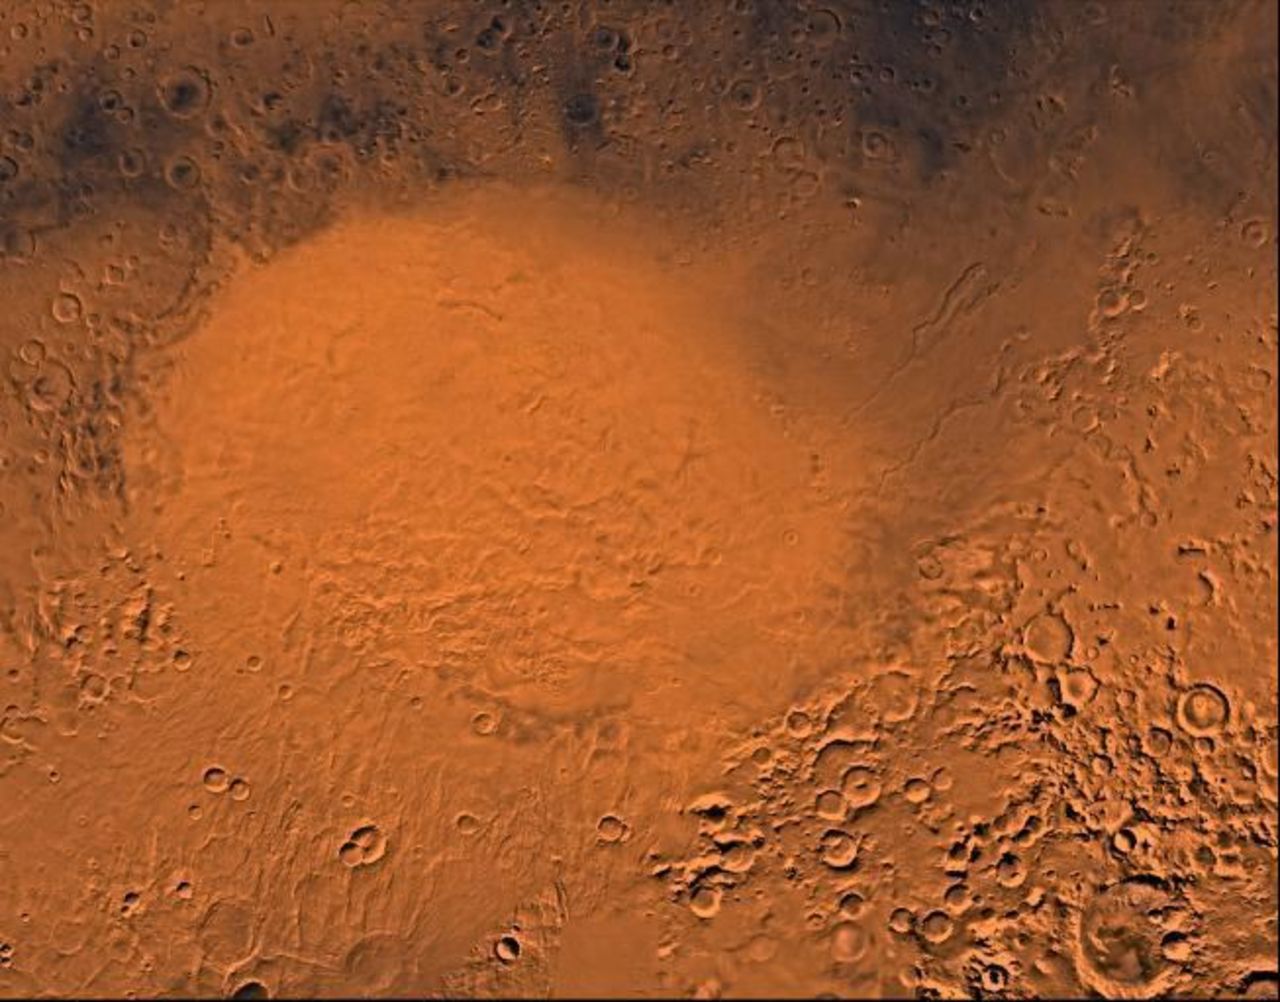 This shows the impact of a projectile, probably an asteroid, on Mars -- the 1,117- mile-diameter Hellas Basin, the largest basin on the planet.